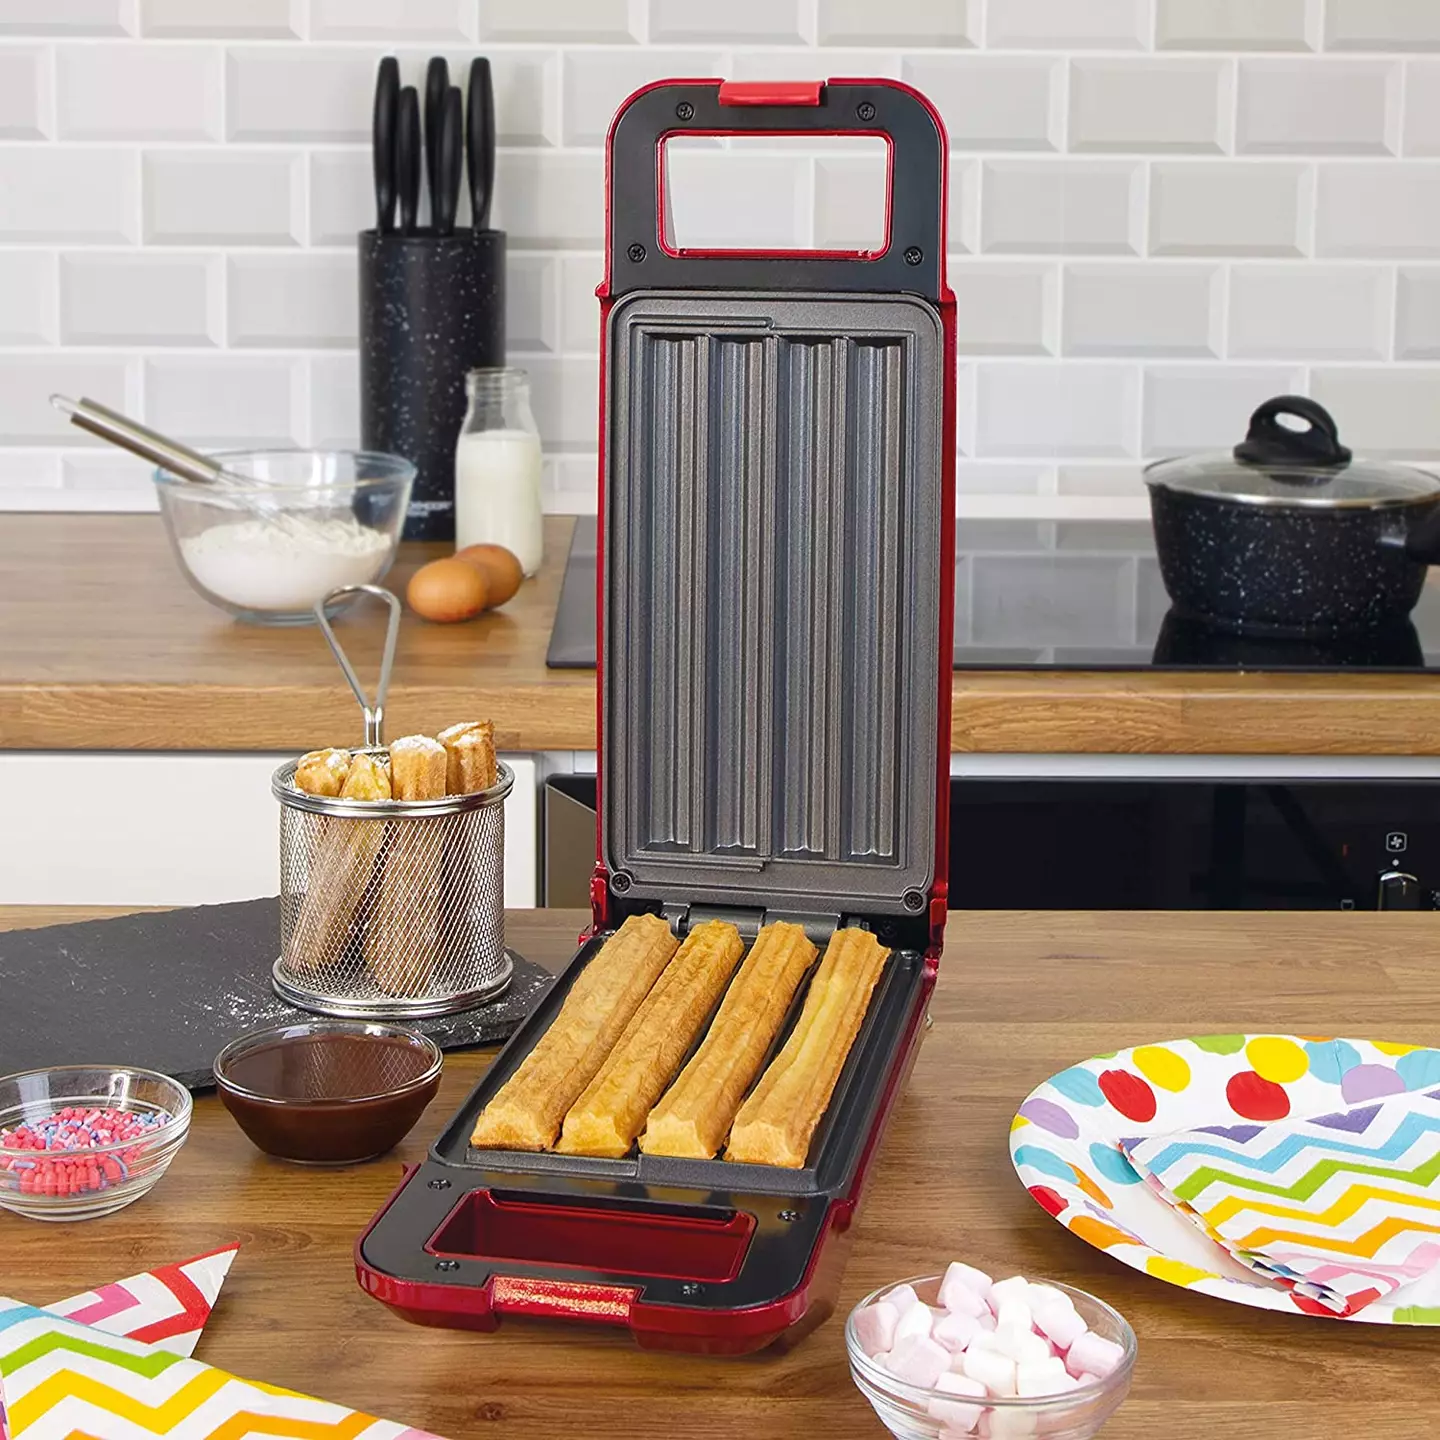 The churro maker is just £14.99 (